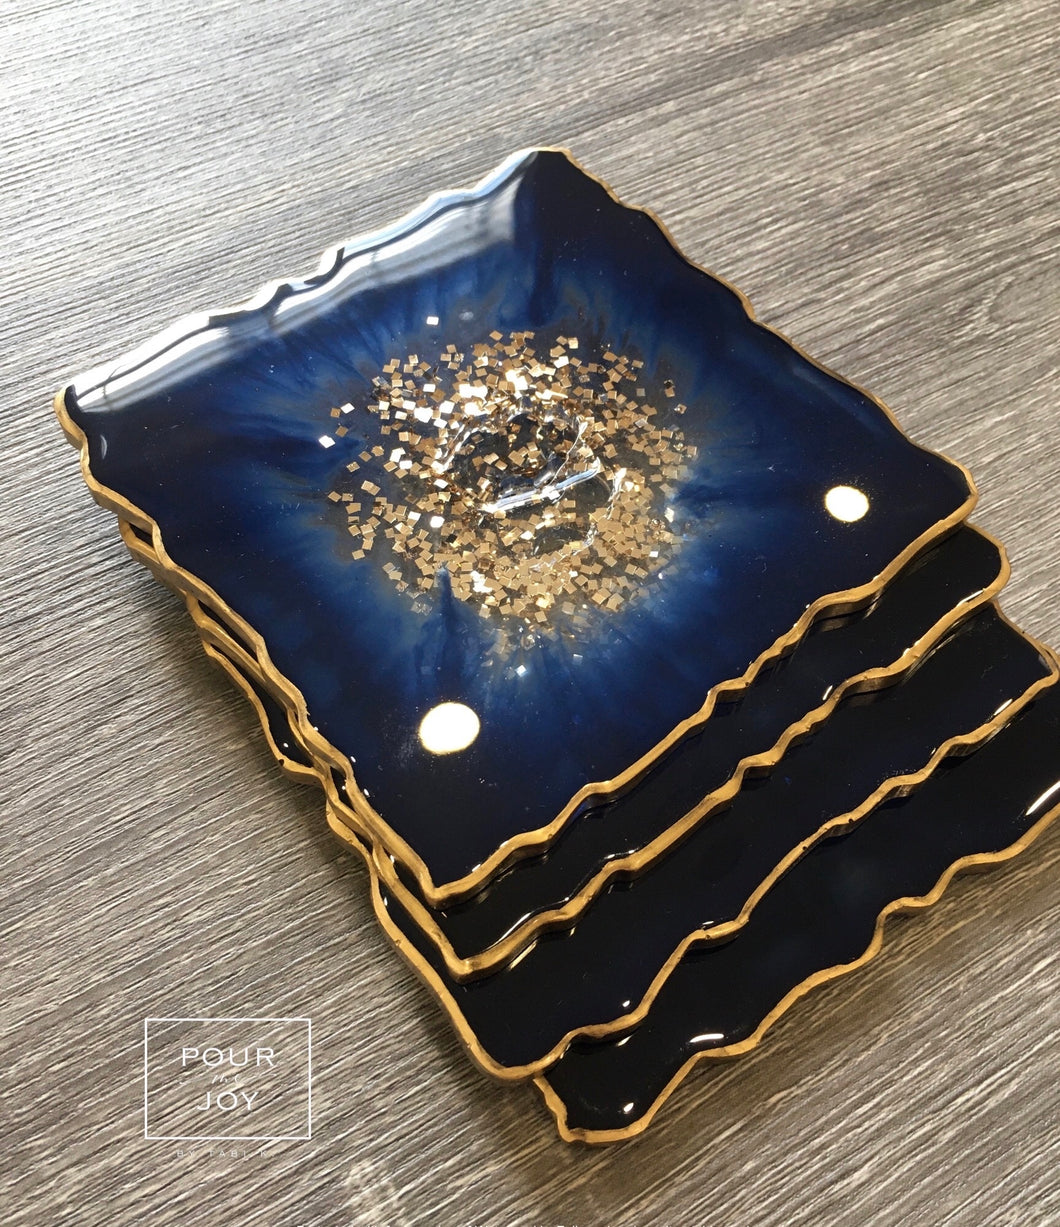 Deep Blue and Gold Coaster Set of 4 - Resin and Gold Sparkles